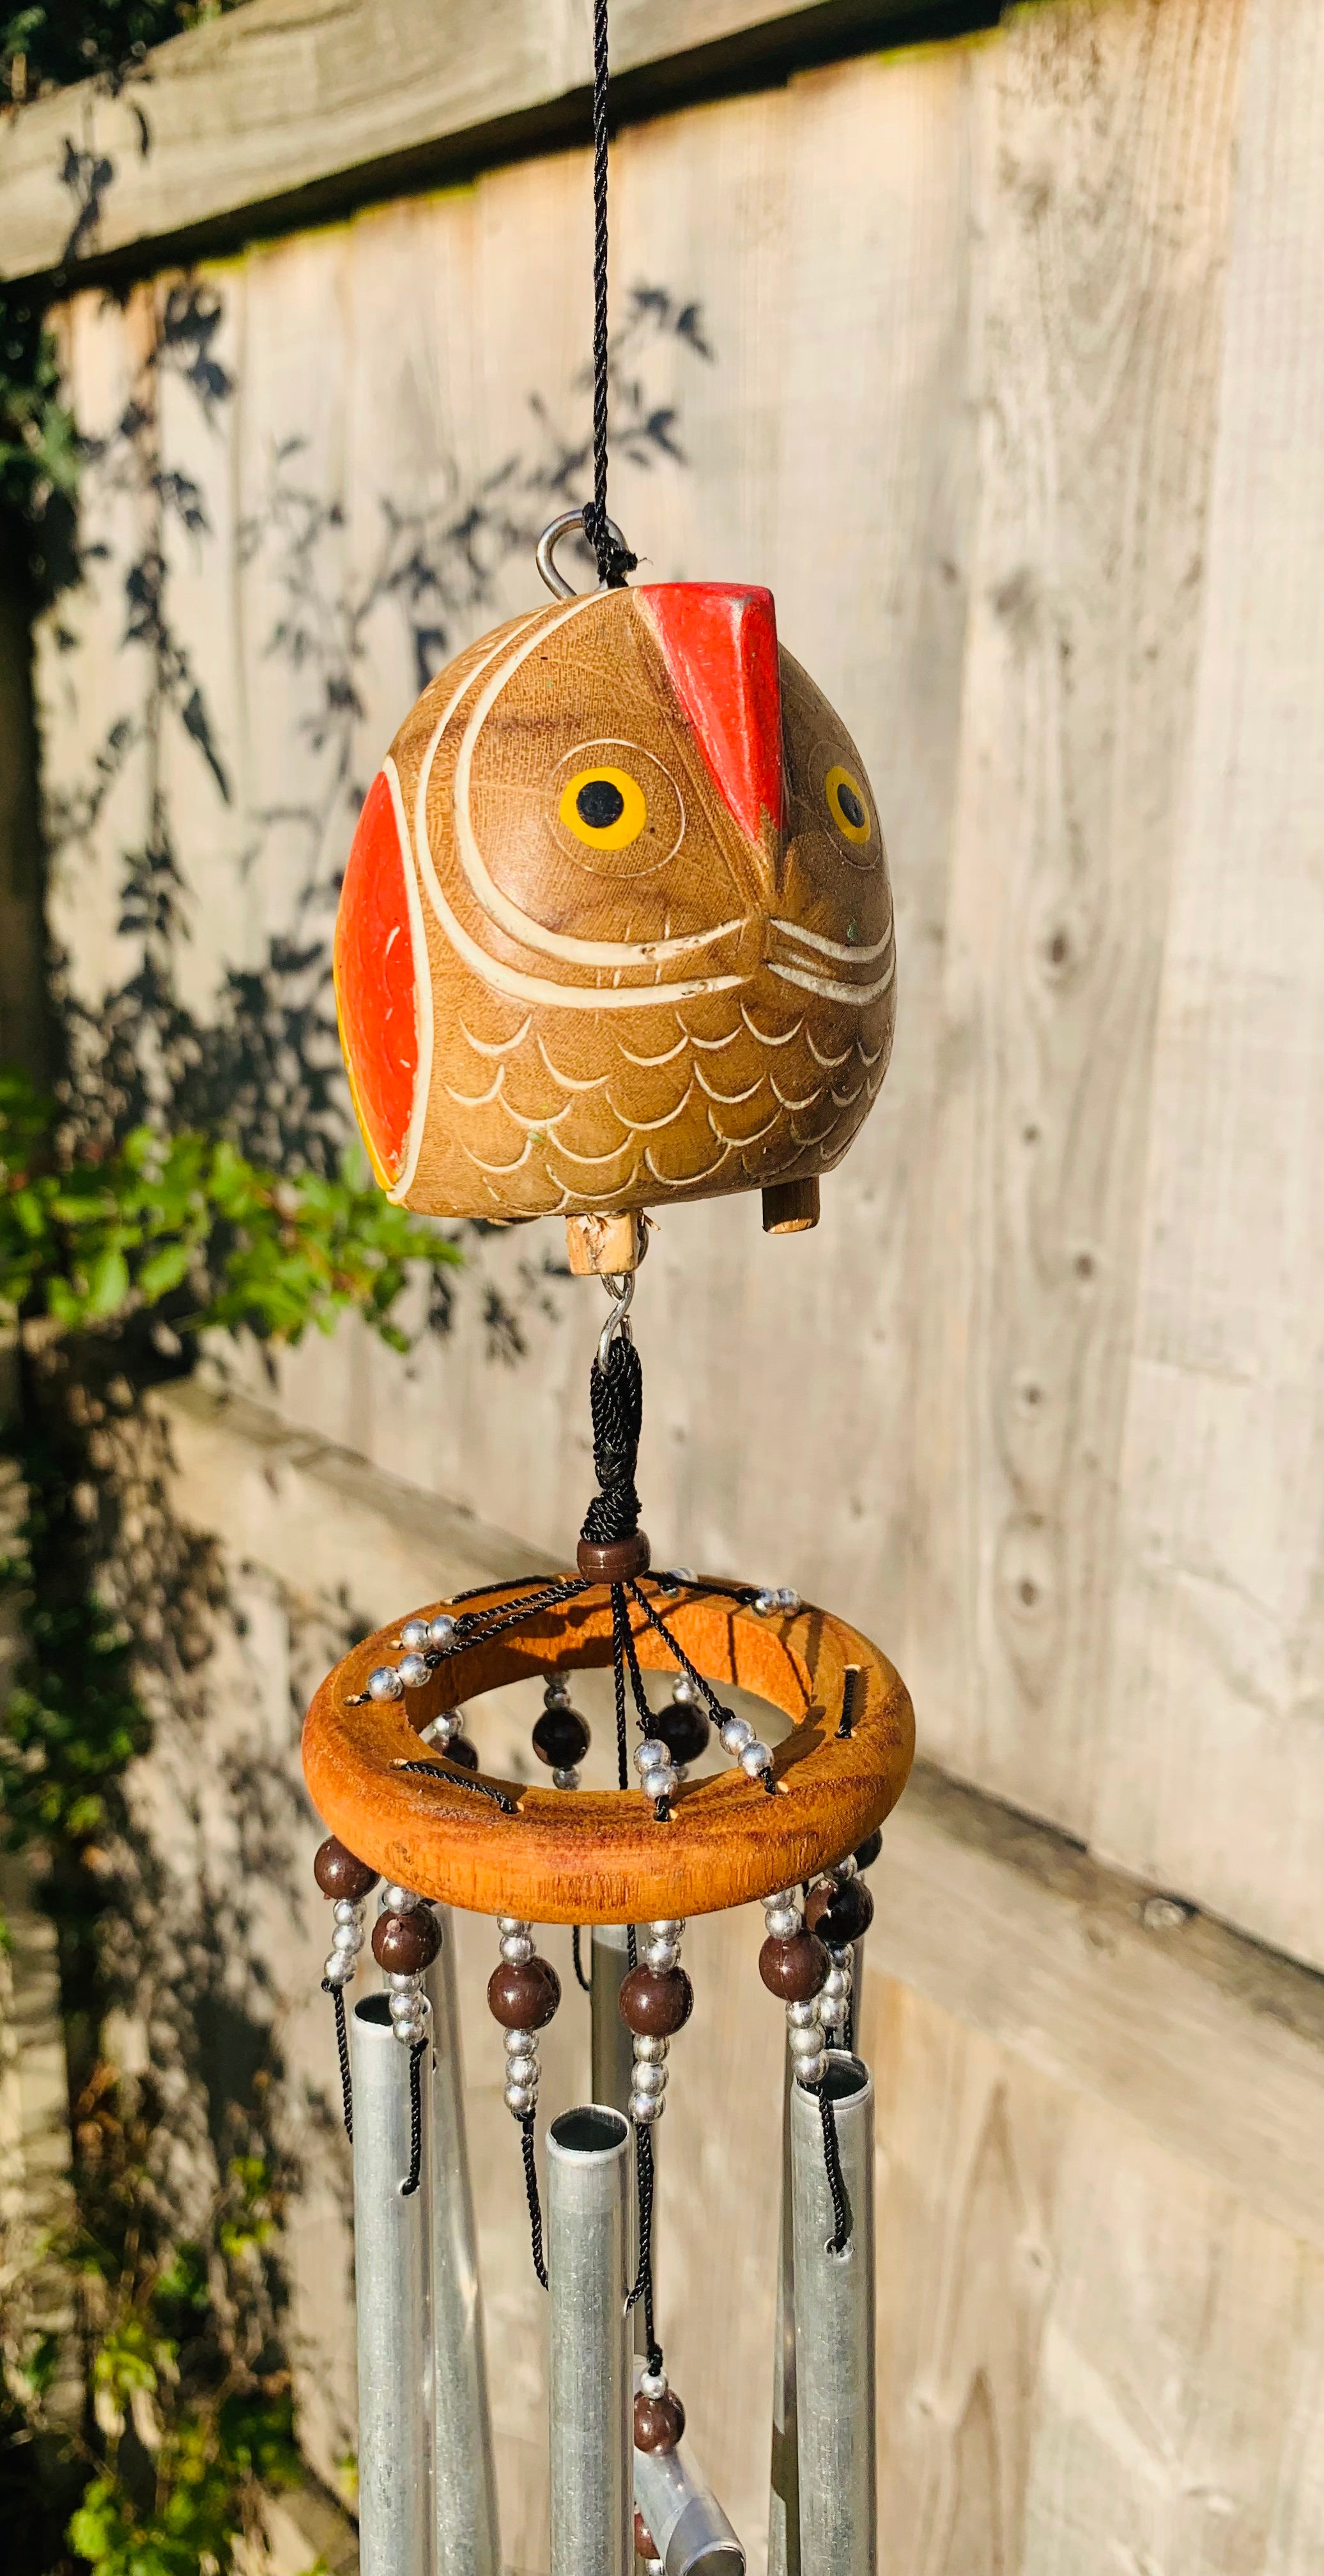 Wind Chime - Owl